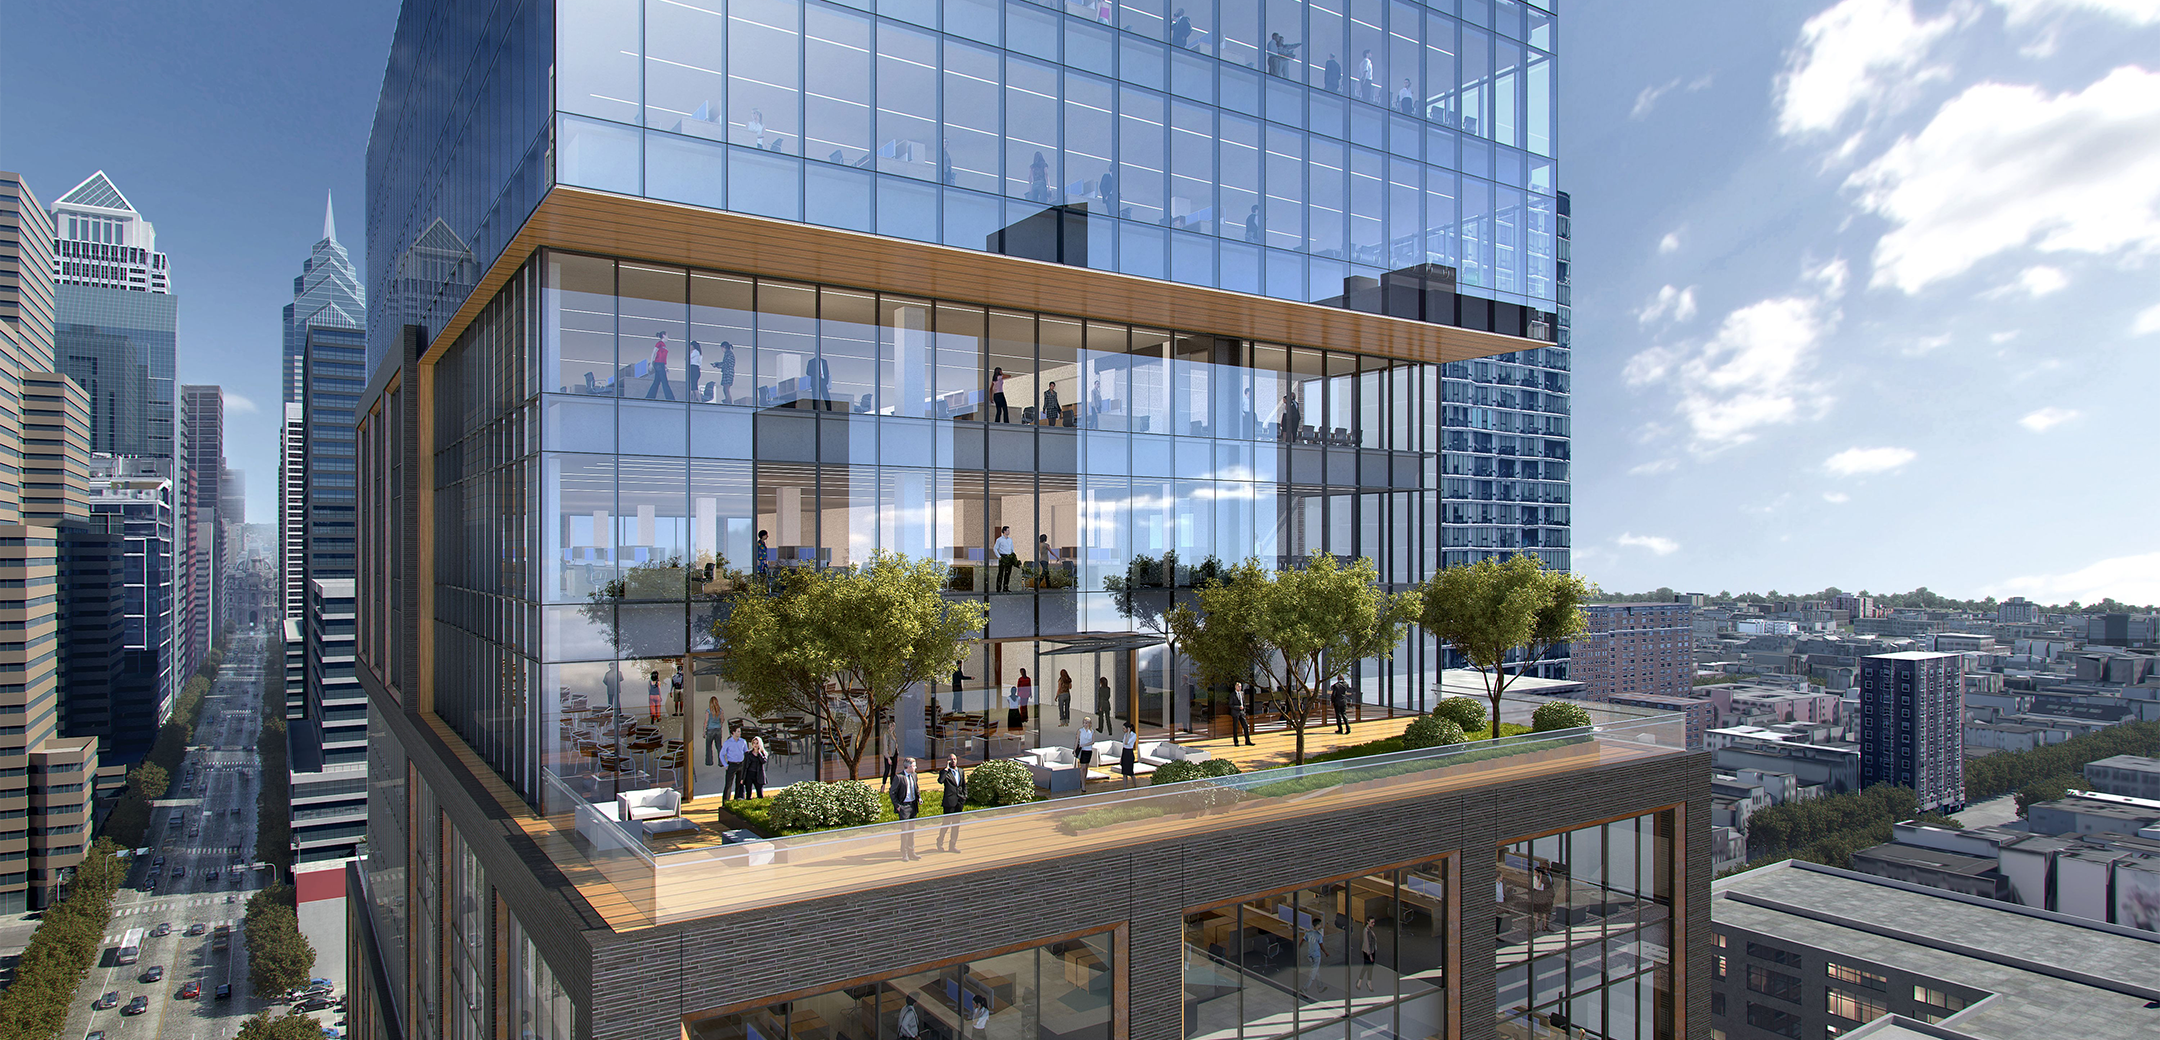 The close up of the outdoor terrace on the exterior rendering of Parkway Corporation's commercial high rise in Philadelphia.